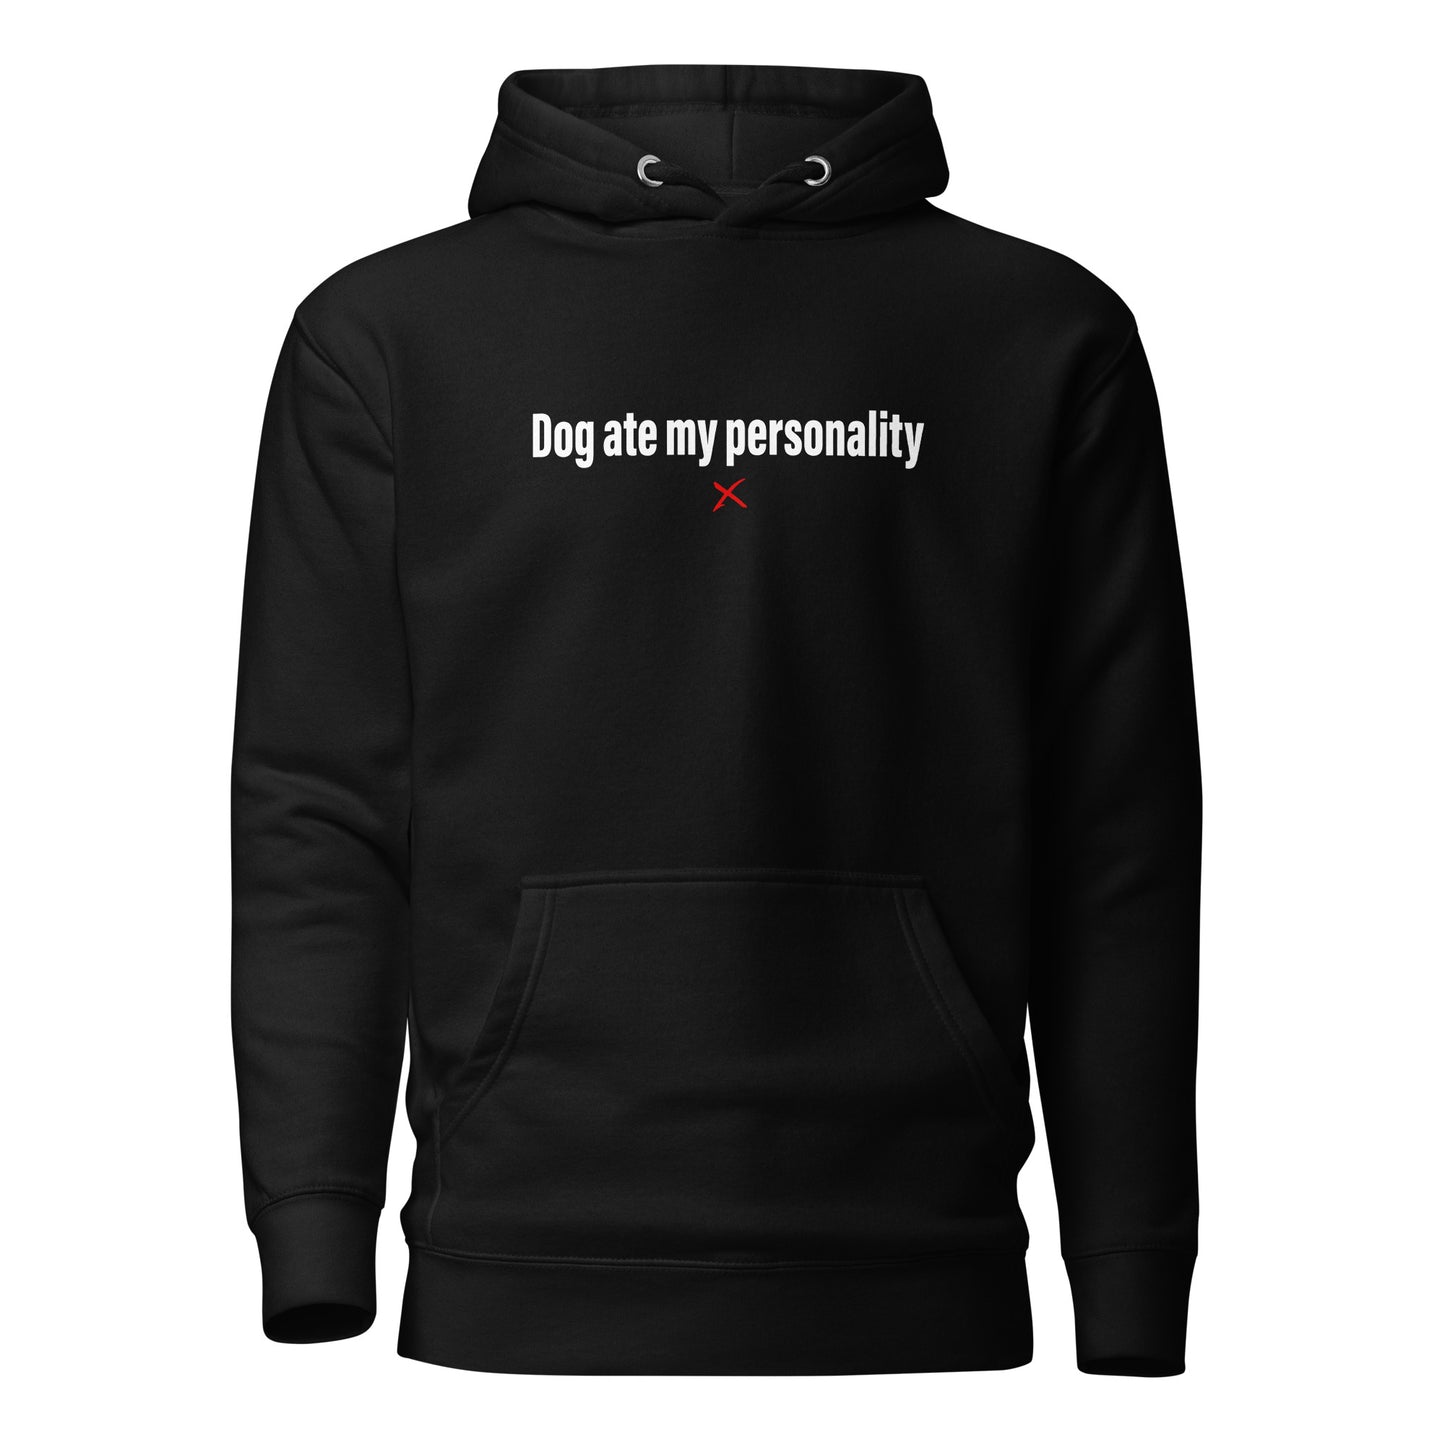 Dog ate my personality - Hoodie